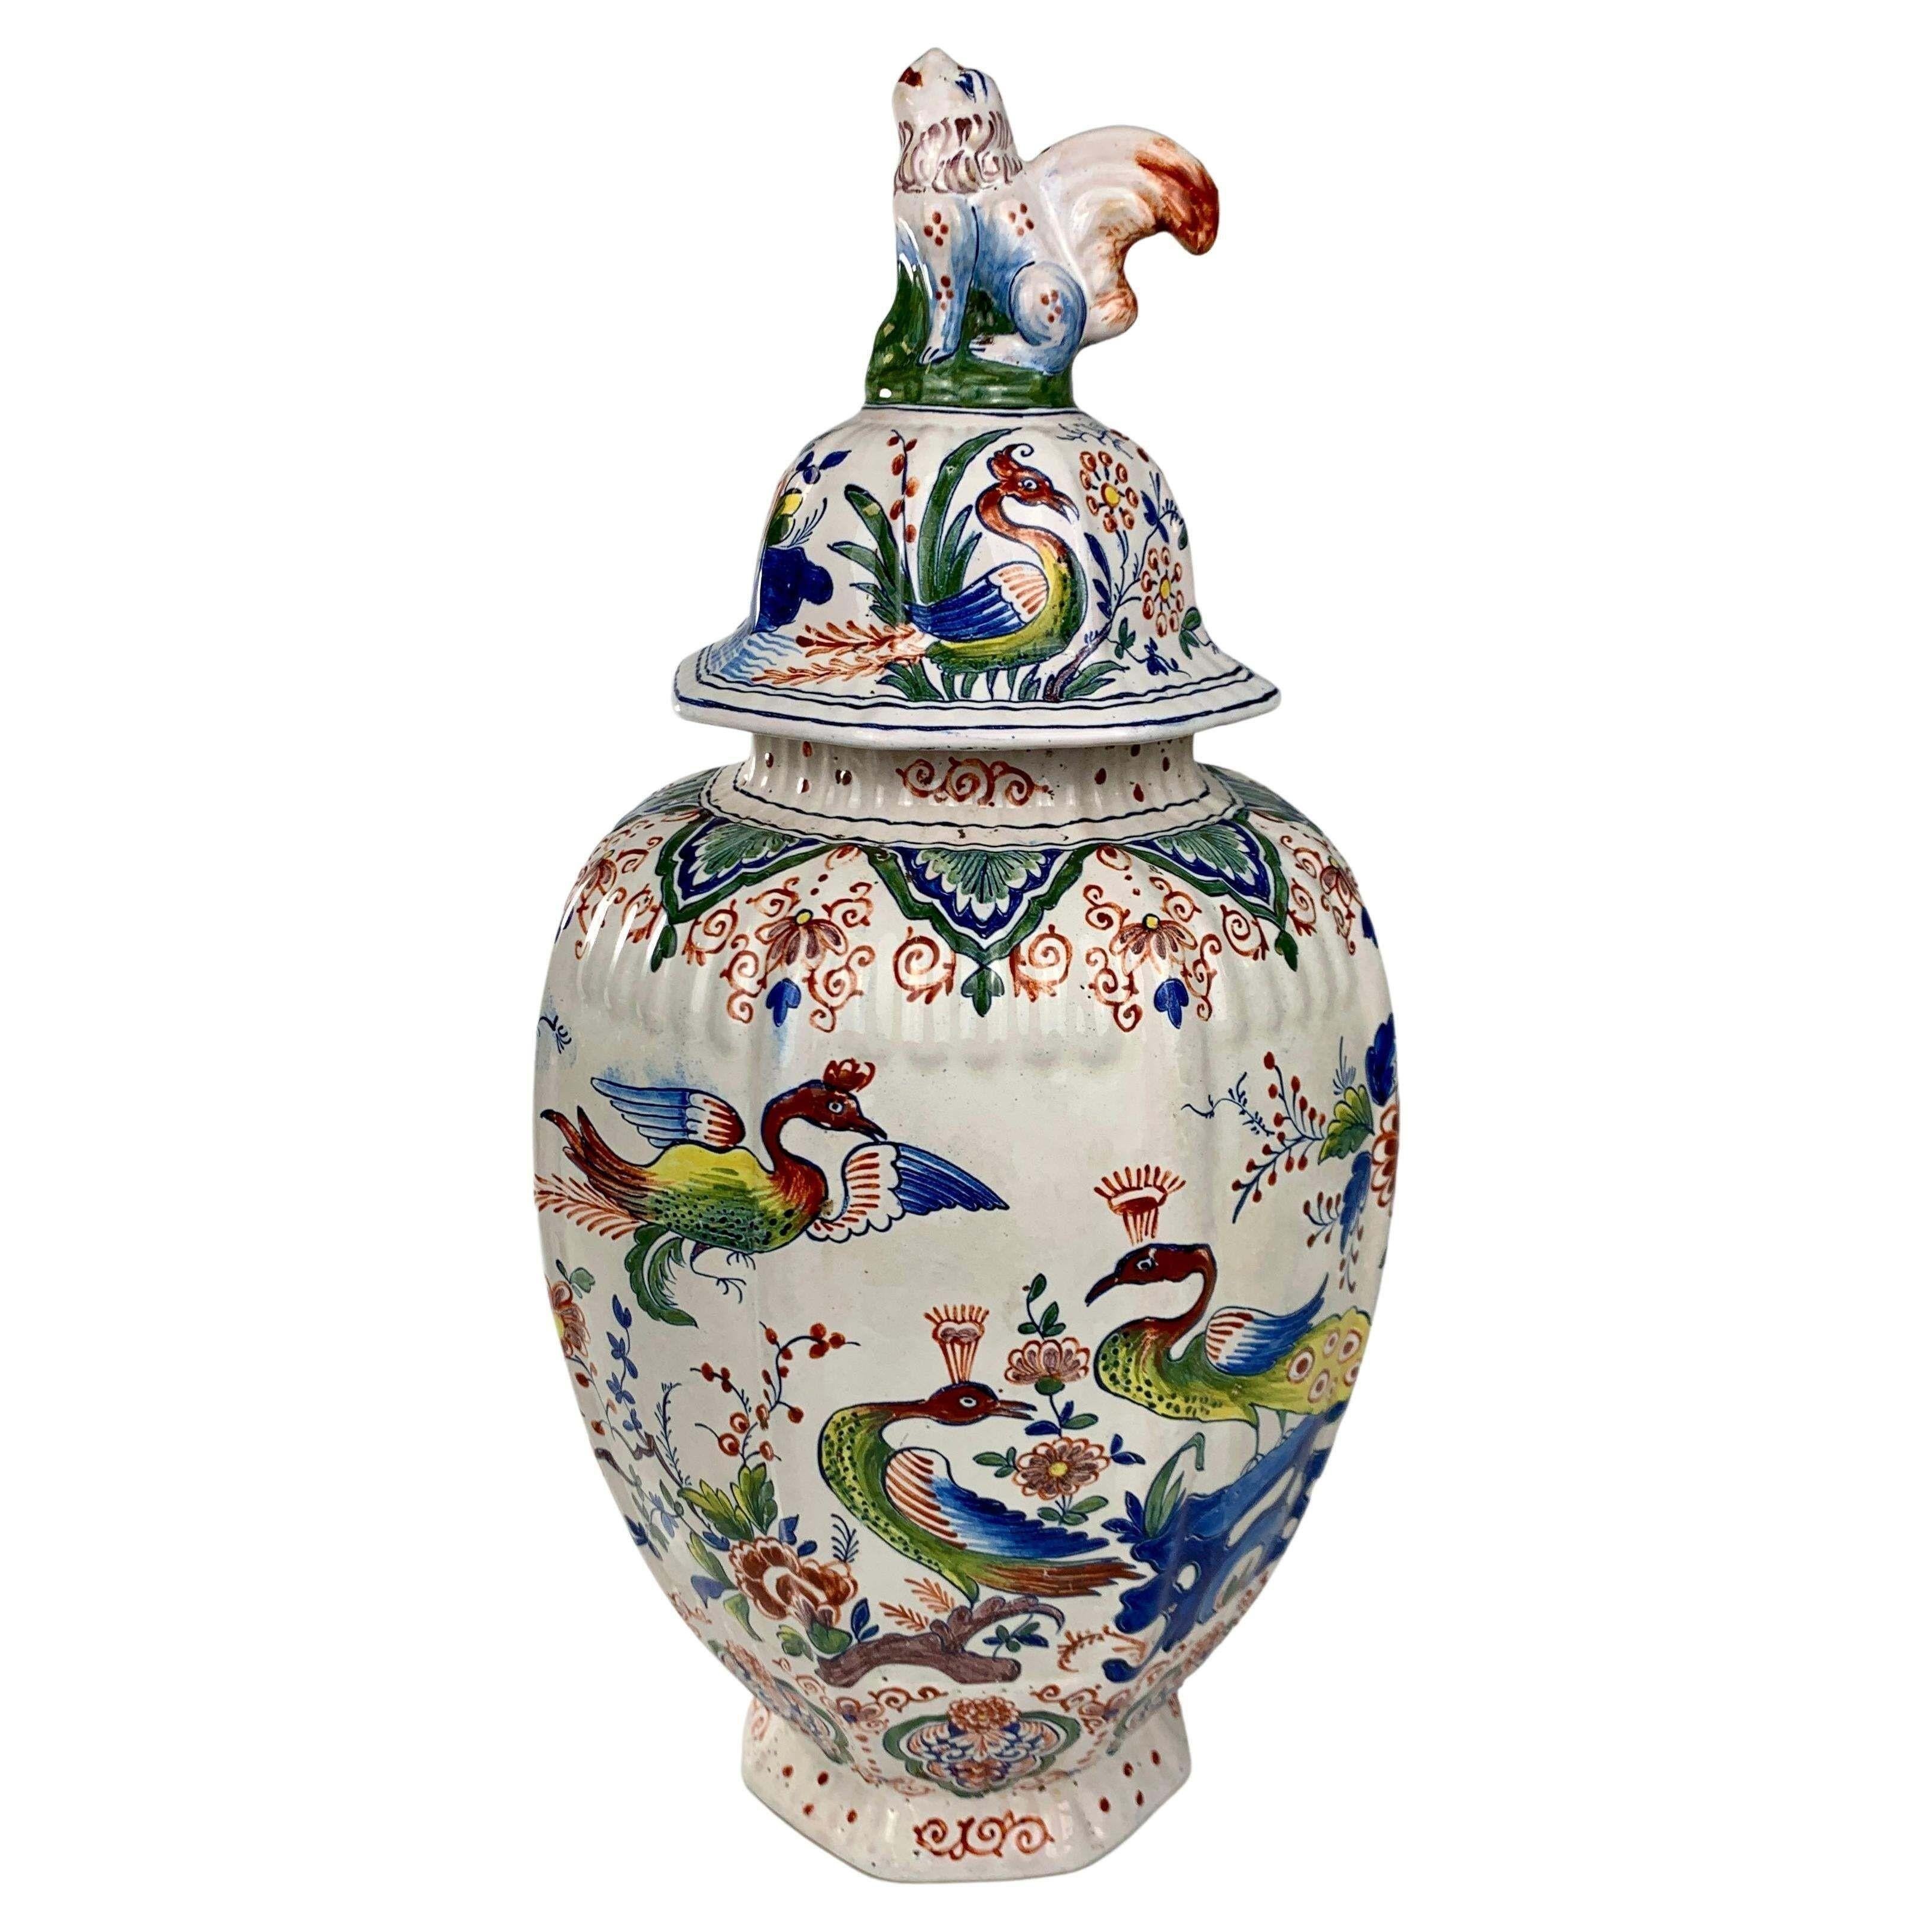 This Dutch Delft jar is hand-painted in the traditional Delft polychrome colors of iron-red, manganese, moss green, cobalt blue, and accents of bright yellow. We see a lush garden with peacocks and stylized flowers in full bloom.
The jar is shaped